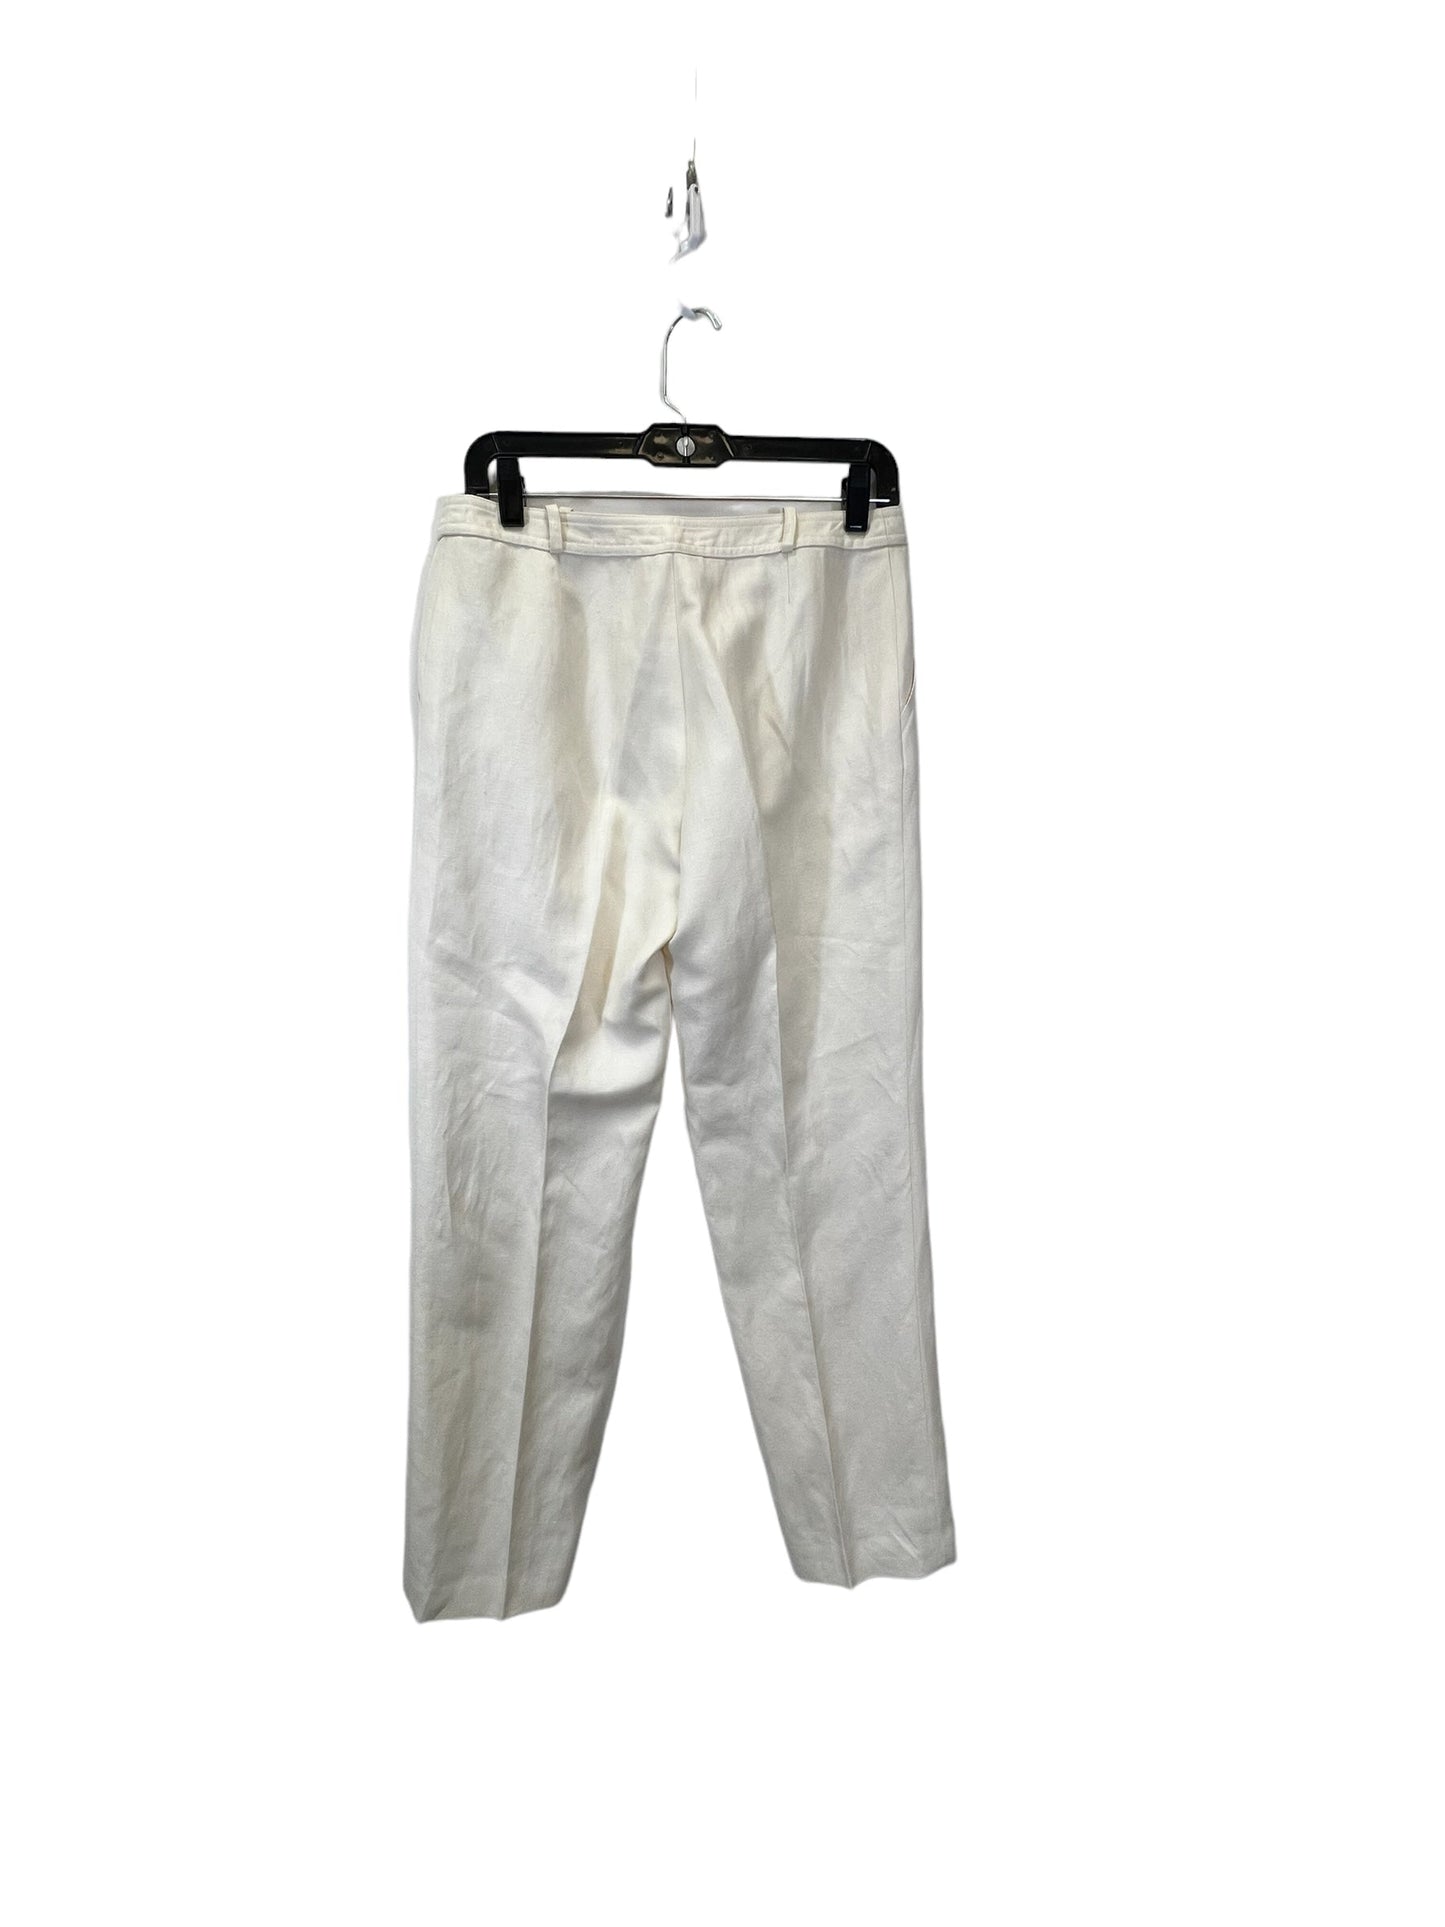 Pants Luxury Designer By Chanel  Size: 4